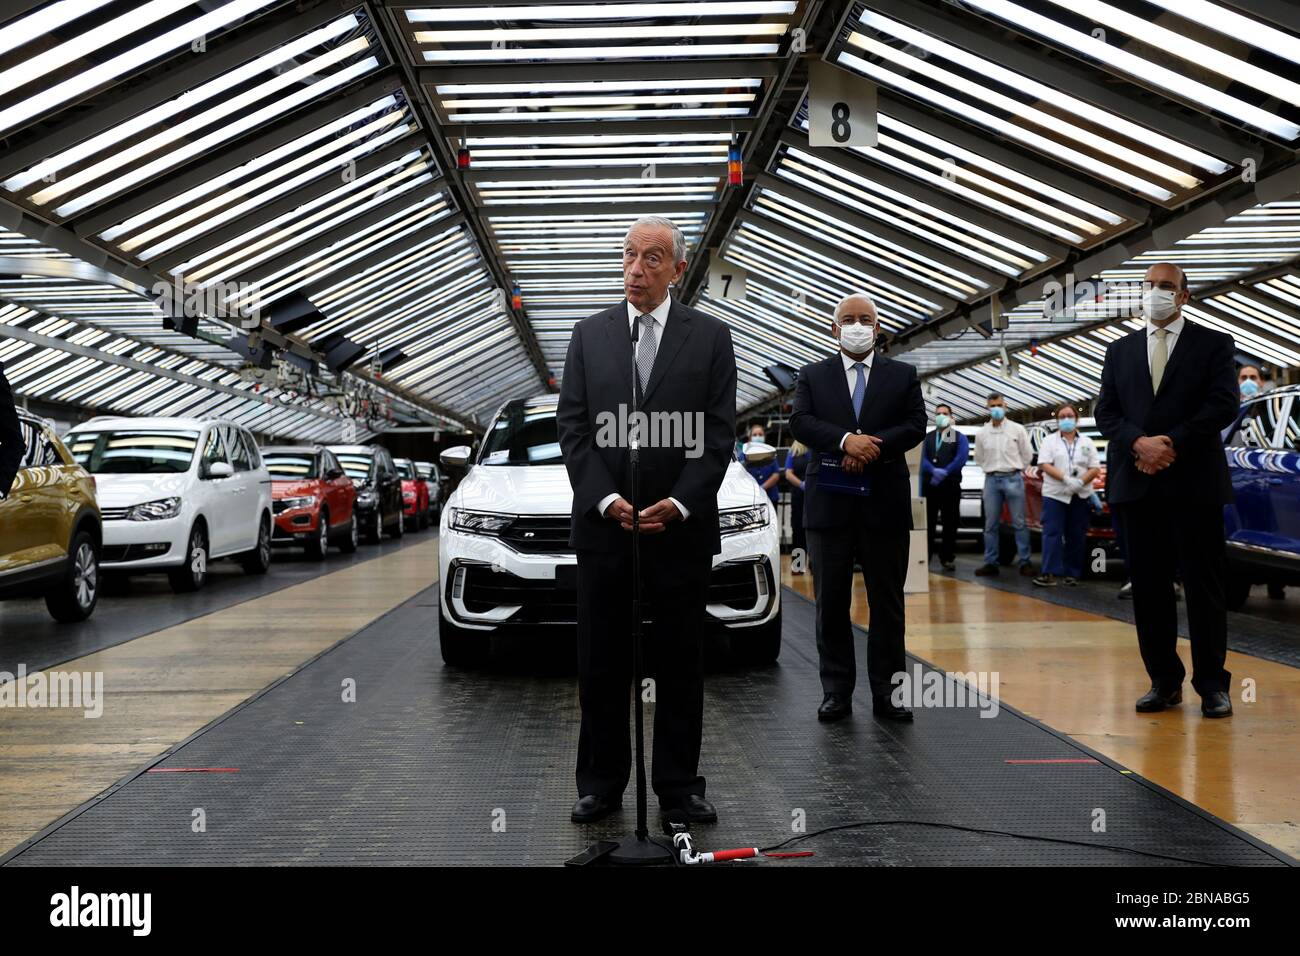 (200514) -- LISBON, May 14, 2020 (Xinhua) -- Portuguese President Marcelo Rebelo de Sousa (1st L) speaks to reporters during his visit to the Volkswagen Autoeuropa car factory in Palmela, Portugal, May 13, 2020. Portuguese President Marcelo Rebelo de Sousa and Prime Minister Antonio Costa on Wednesday encouraged all industries to restart under strict conditions amid the COVID-19 pandemic, Lusa News Agency reported. After their joint visit to automotive assembly plant Autoeuropa, the two leaders expressed their confidence in the resumption of production for the car producer. (Photo by Pedro Stock Photo